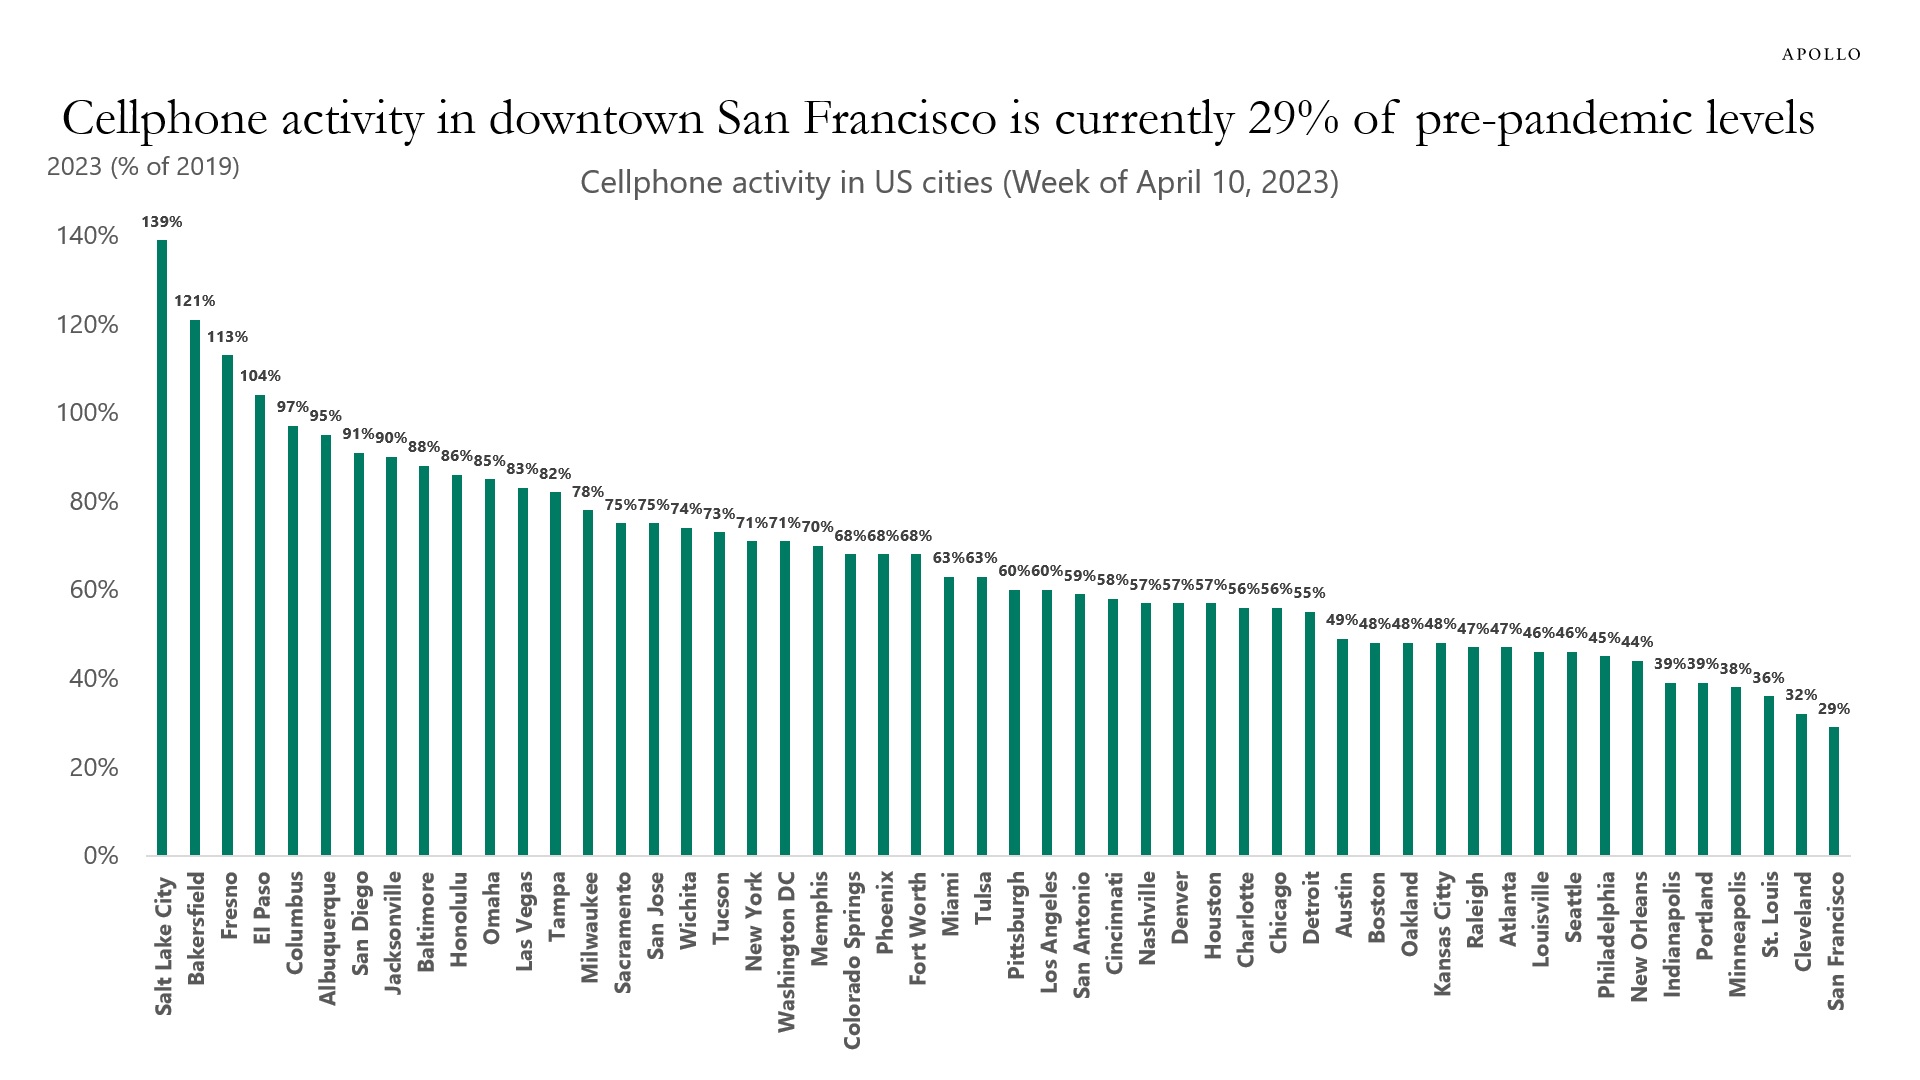 Cellphone activity in San Francisco is only 29% of pre-pandemic levels